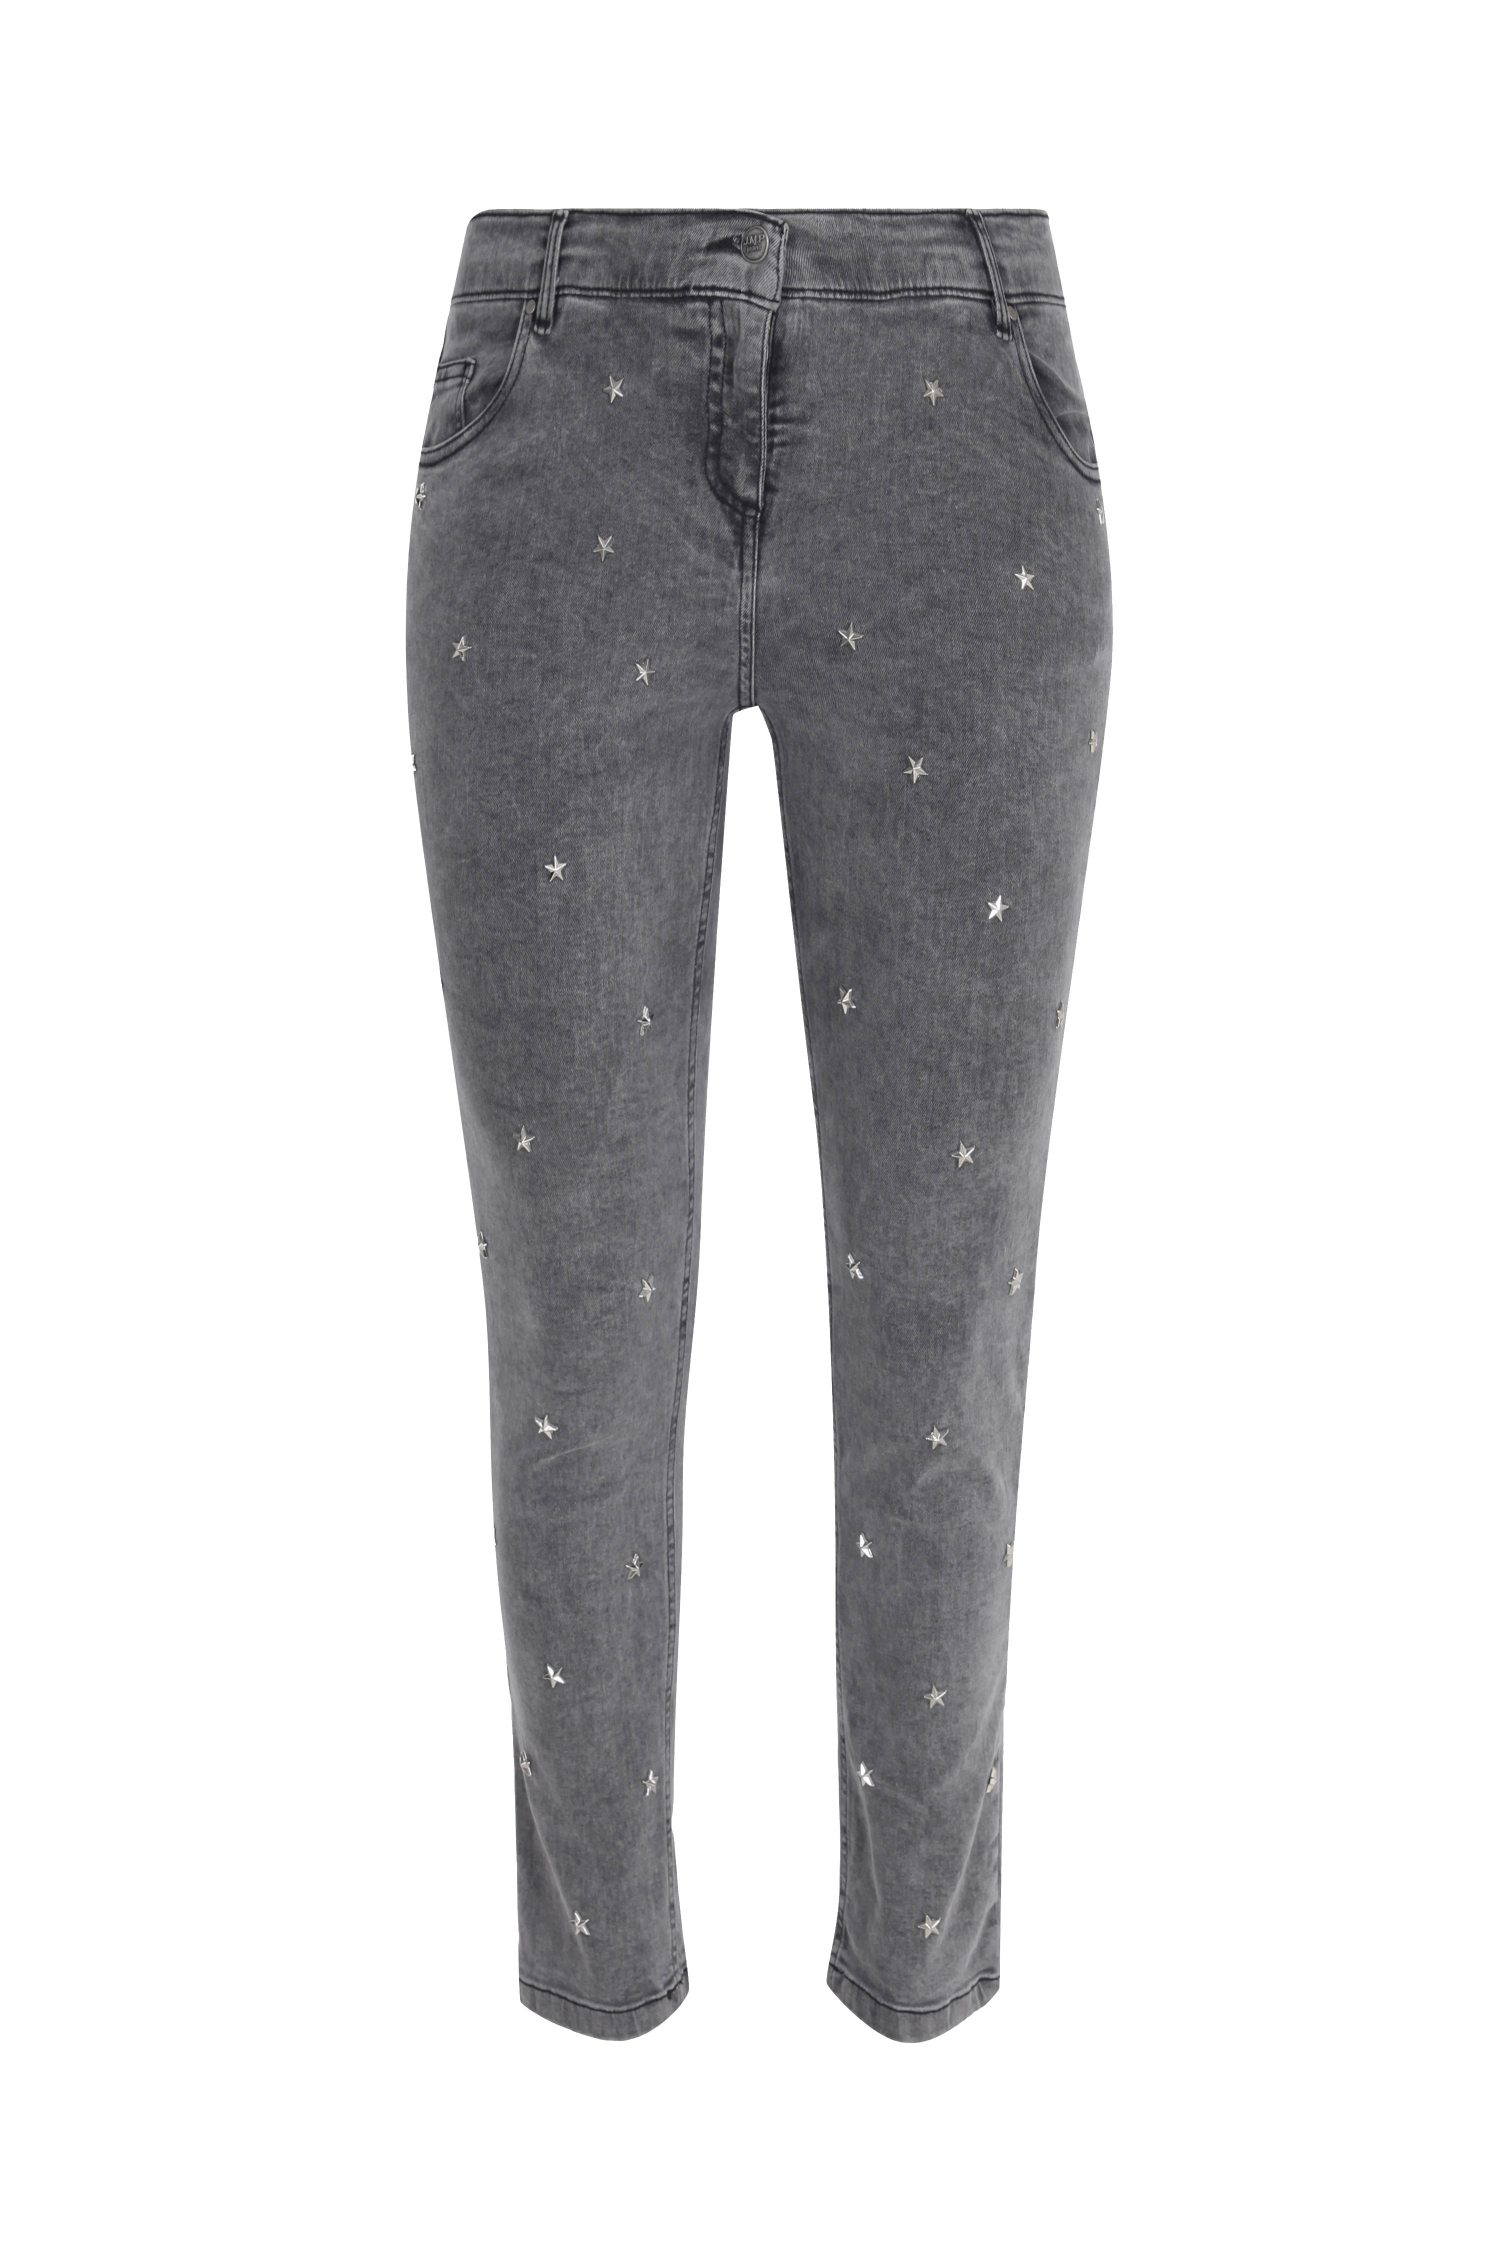 Gray jeans with studs on the front